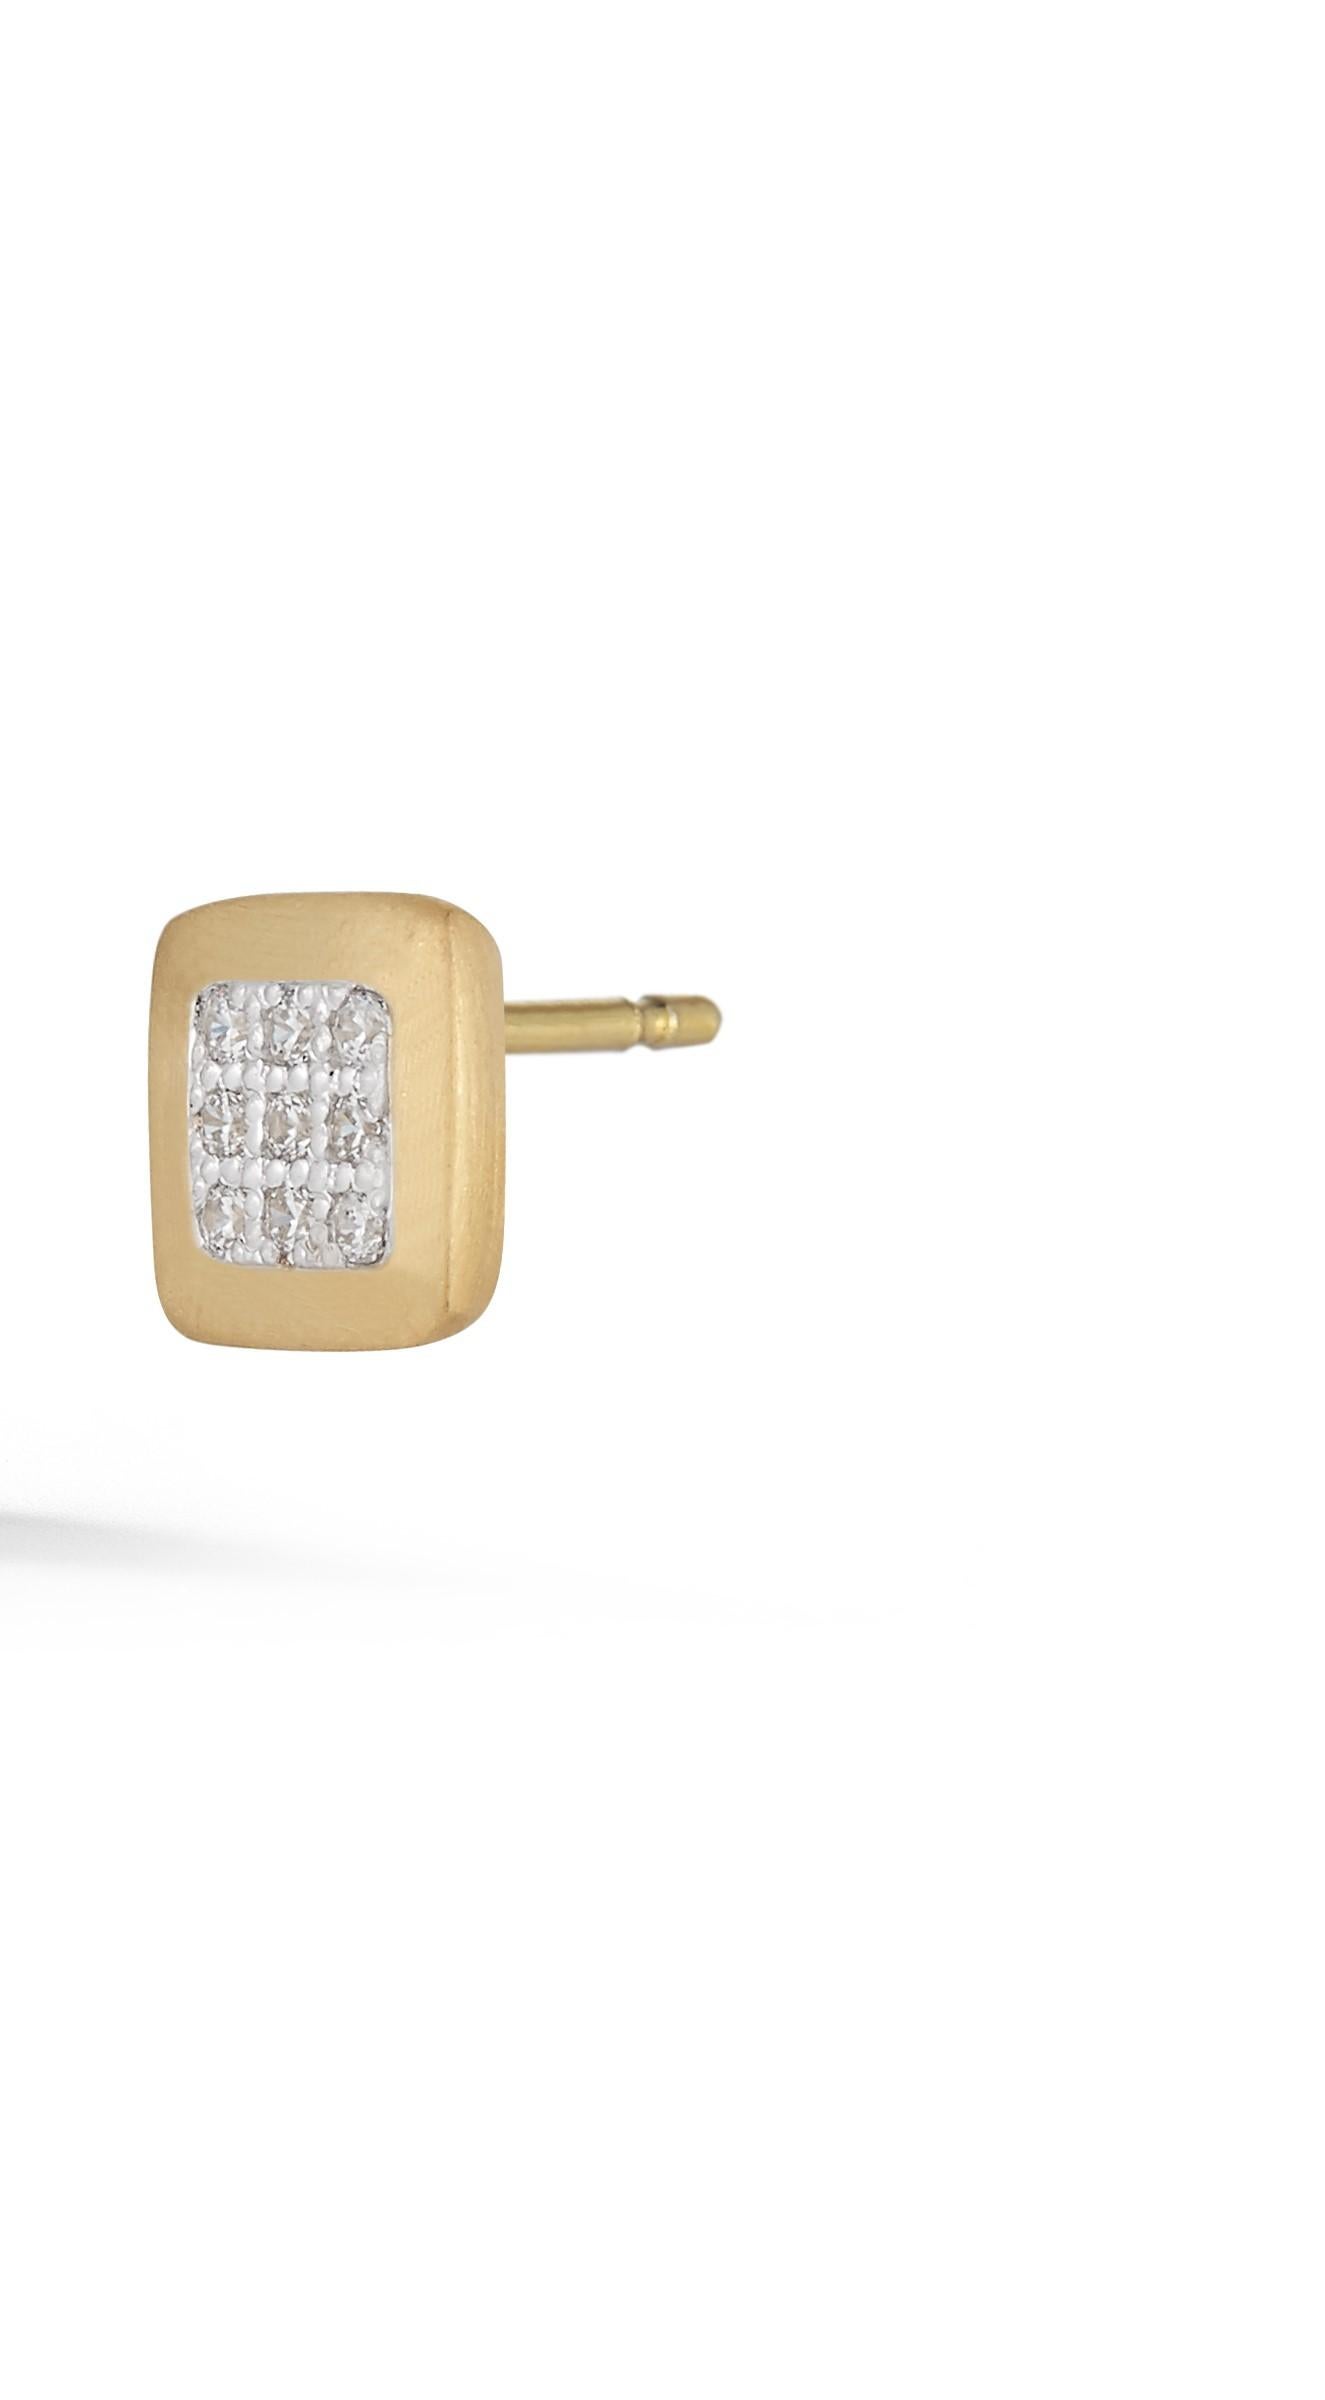 14 Karat Yellow Gold Hand-Crafted Matte-Finished Square-Shaped Stud Earrings, Centered with 0.18 Carats of Pave Set Diamonds.
